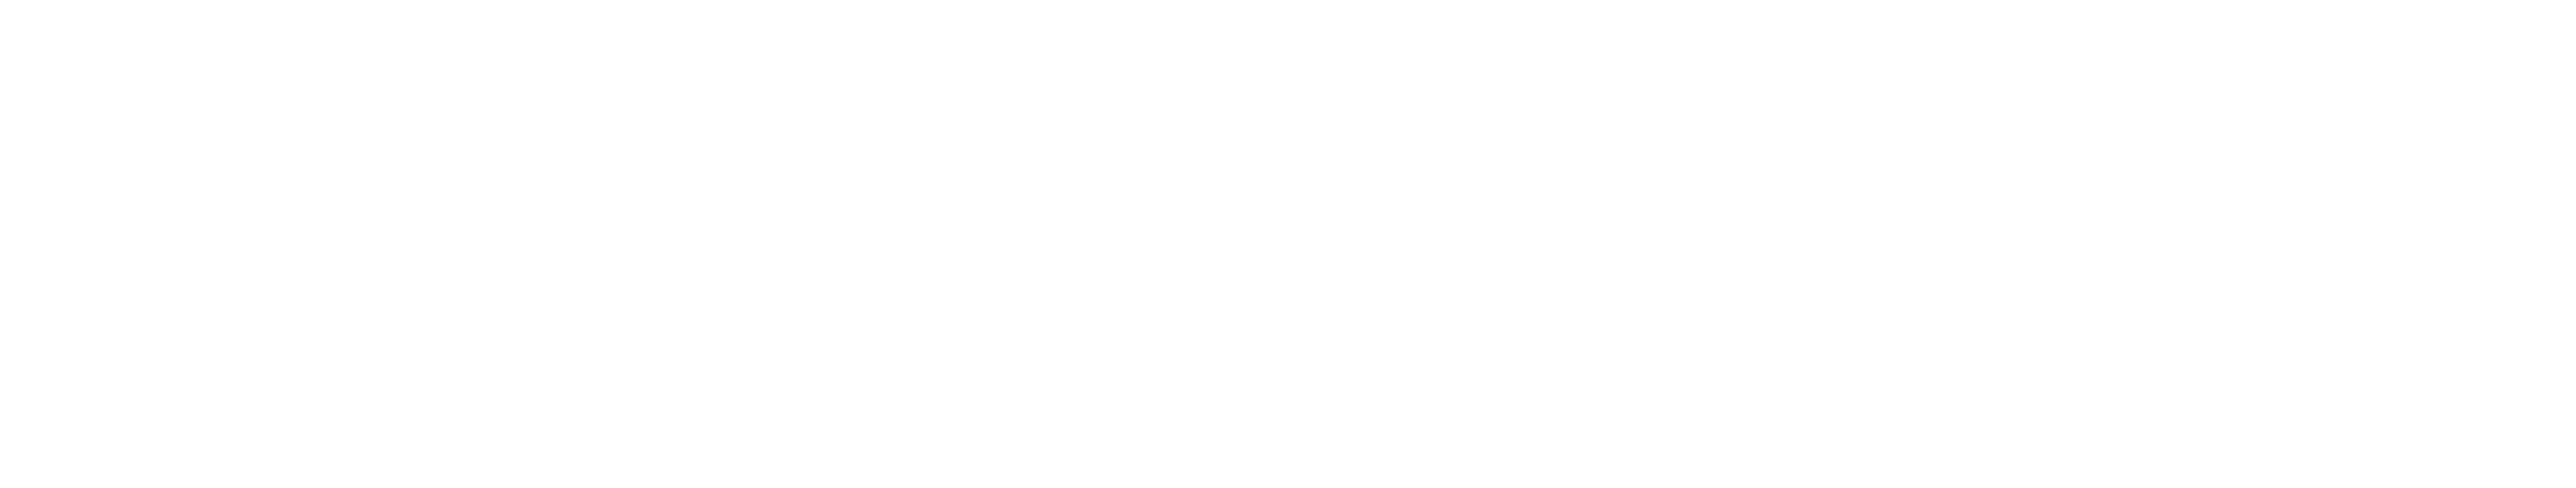 FitClouds.co